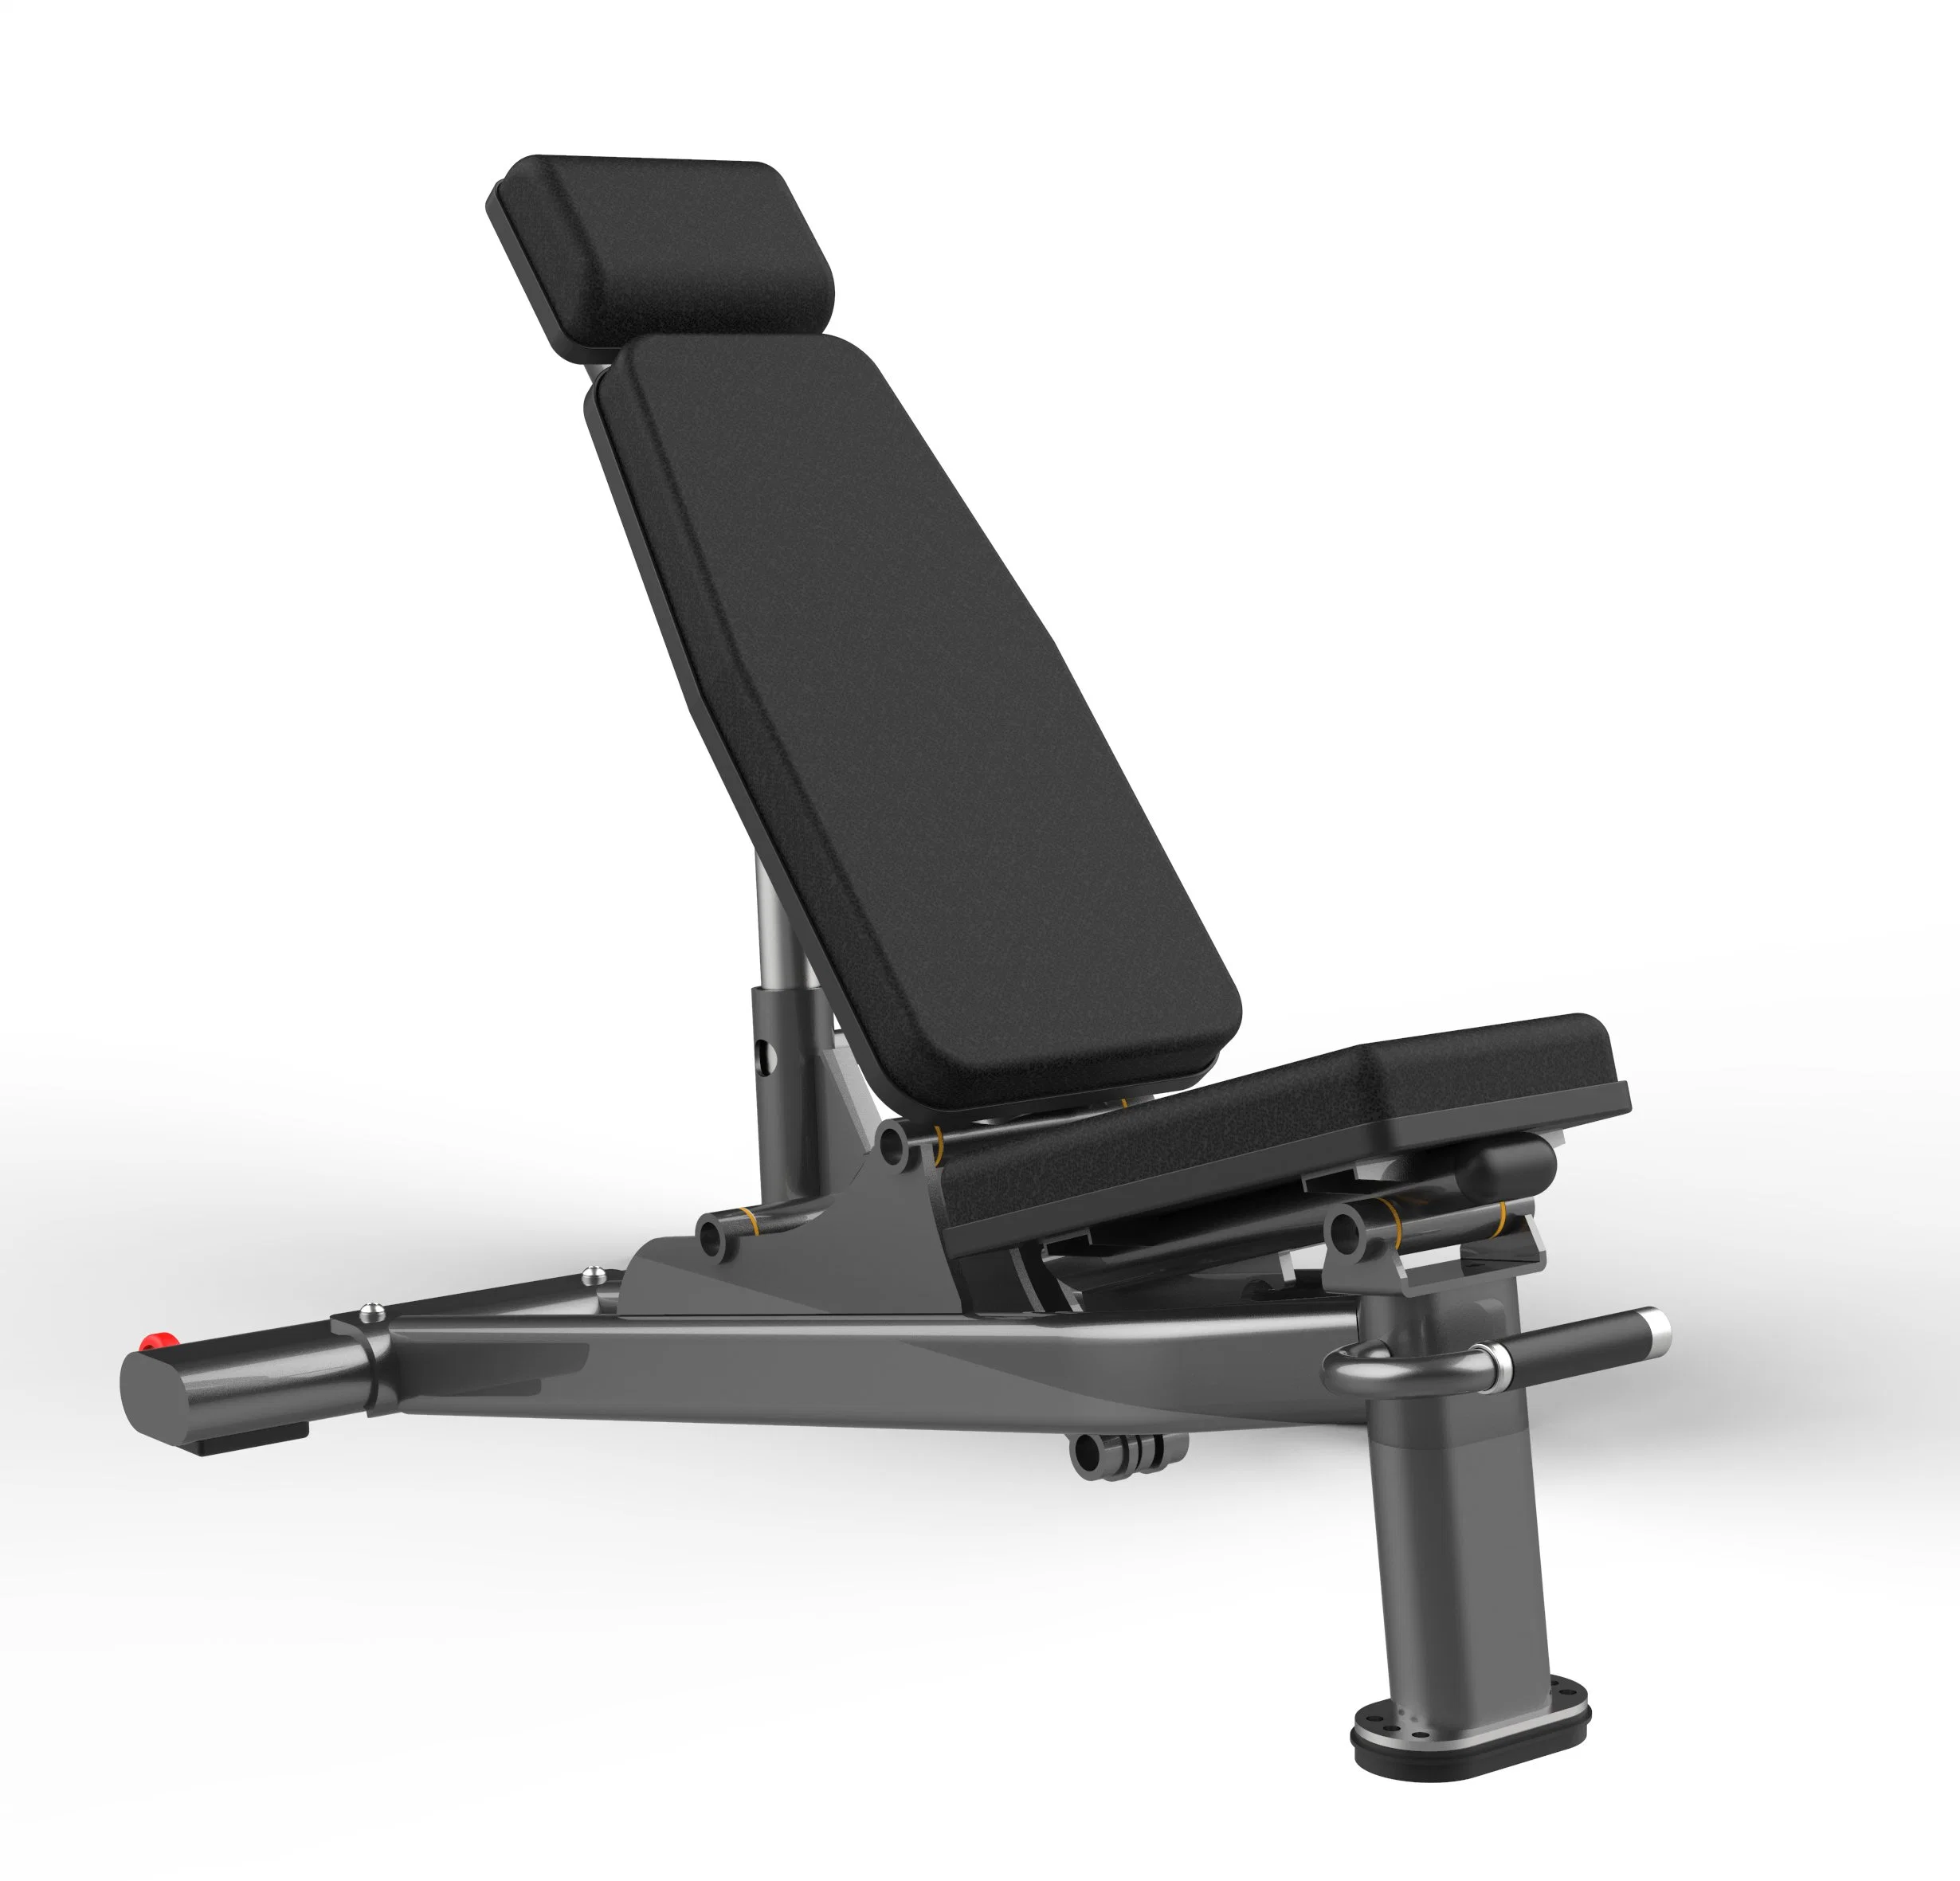 Fitness Equipment/Gym Product for Adjustable Bench